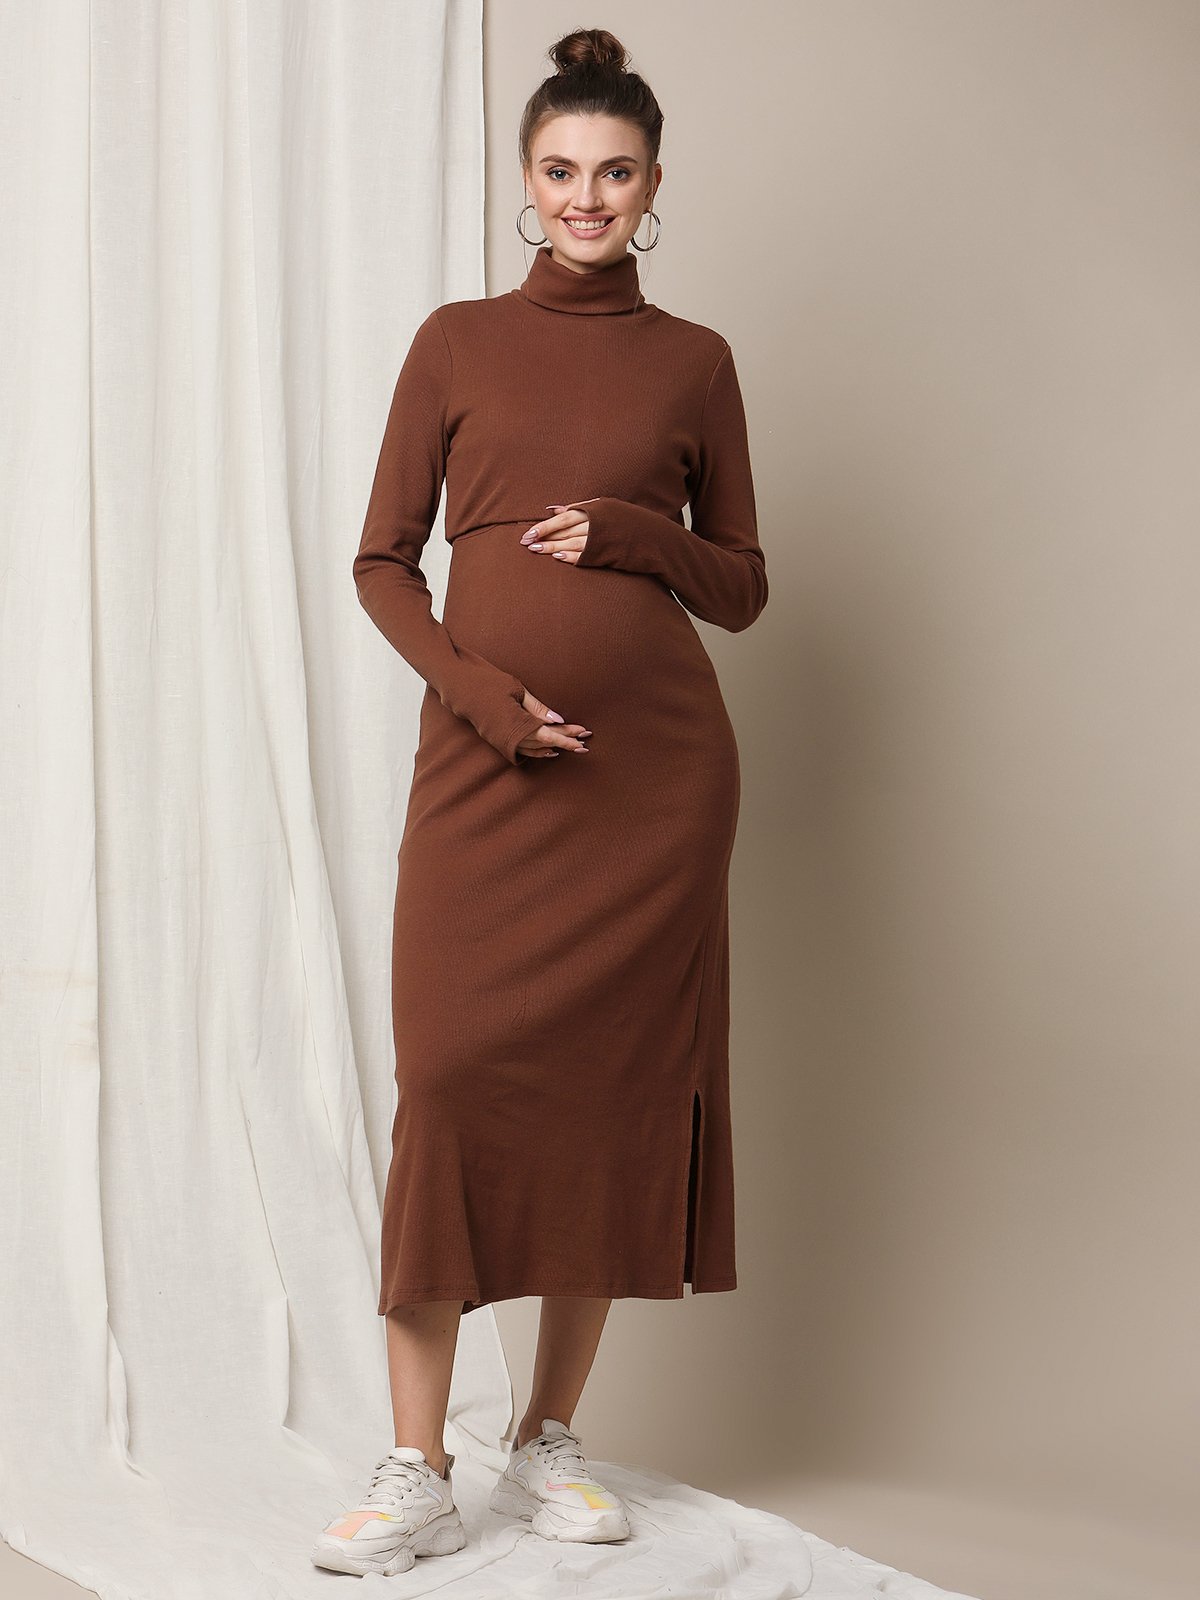 Long Sleeve Cowl Neck Maternity Gown With Mini Train - Etsy | Maternity  gowns, Long sleeve gown, Simple gowns